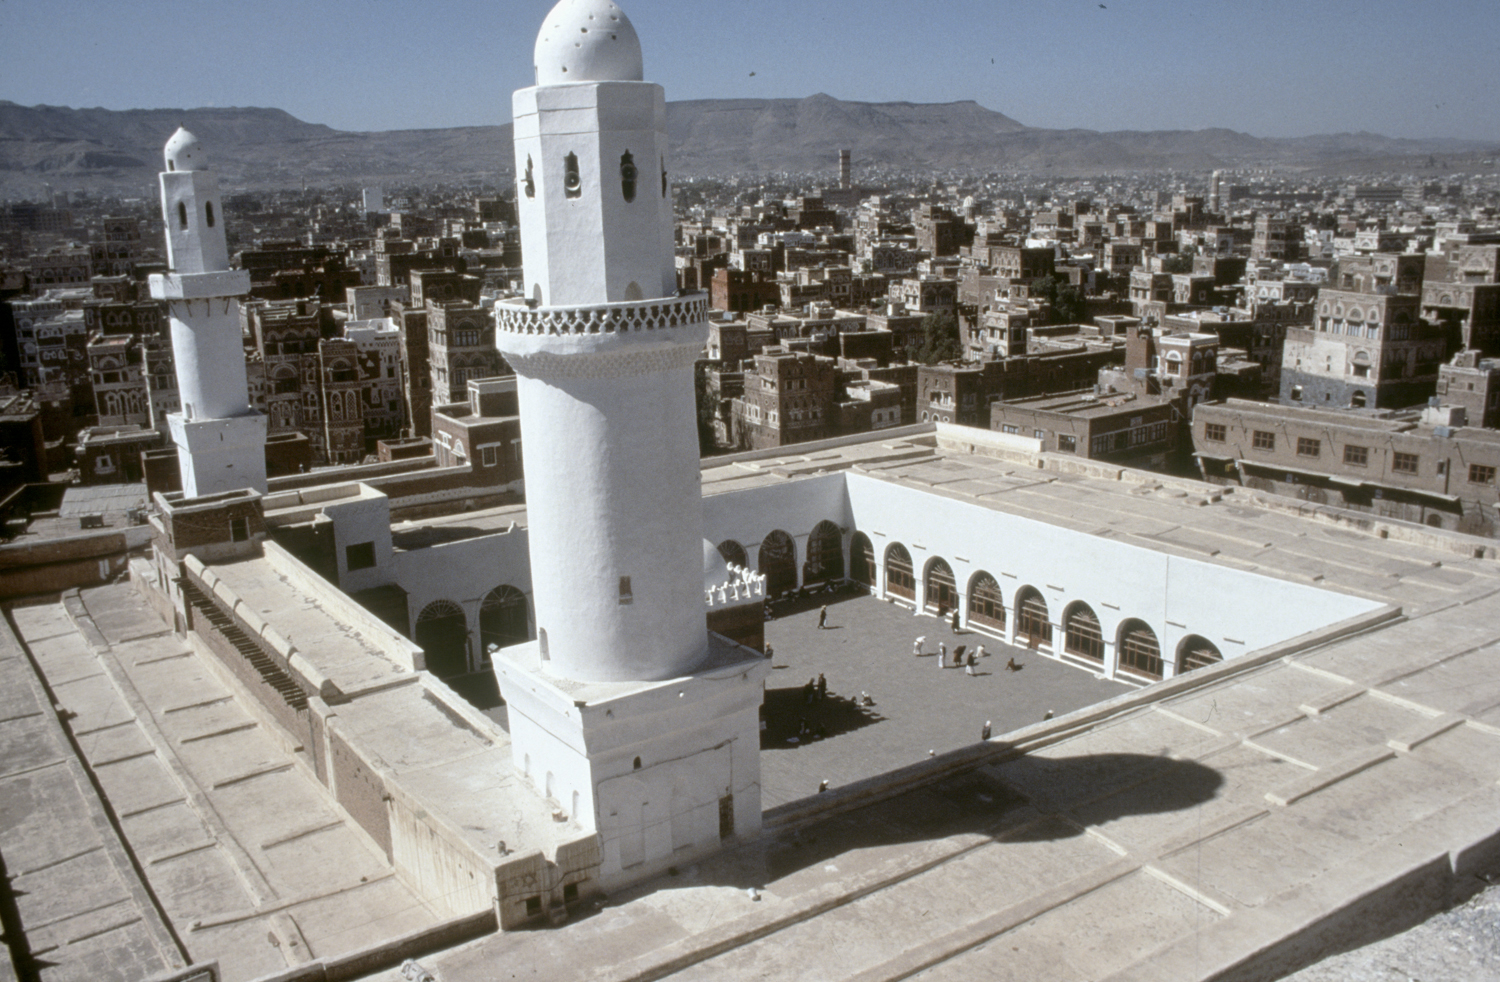 Jami' al-Kabir - Exterior view of mosque from above with minaret in the foreground